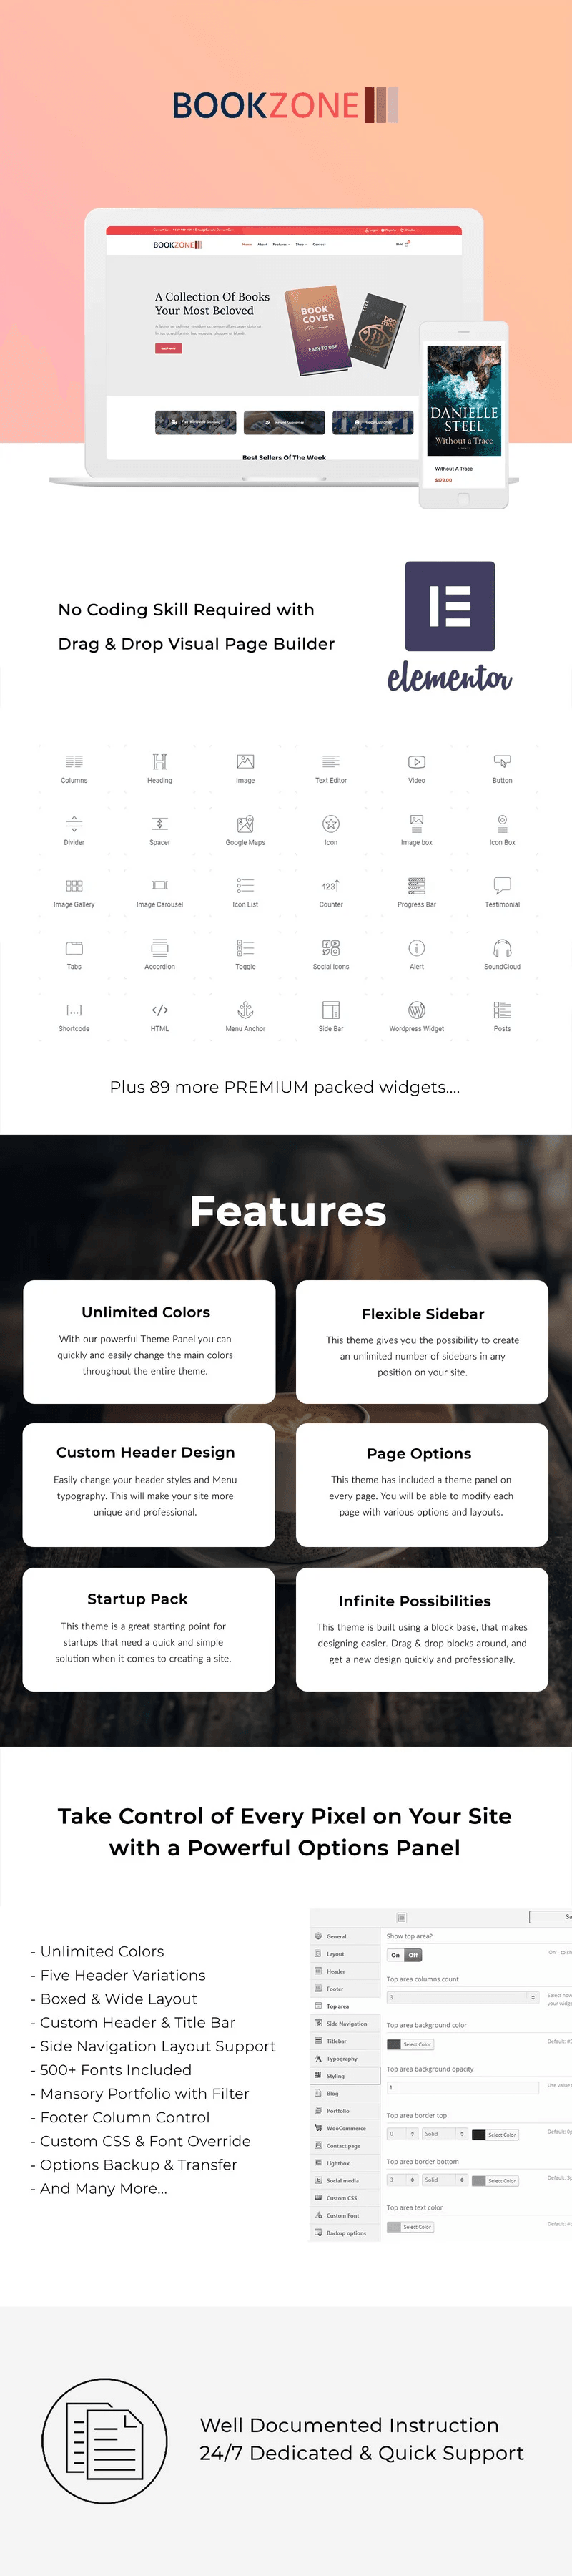 Ready-made template with plugins.